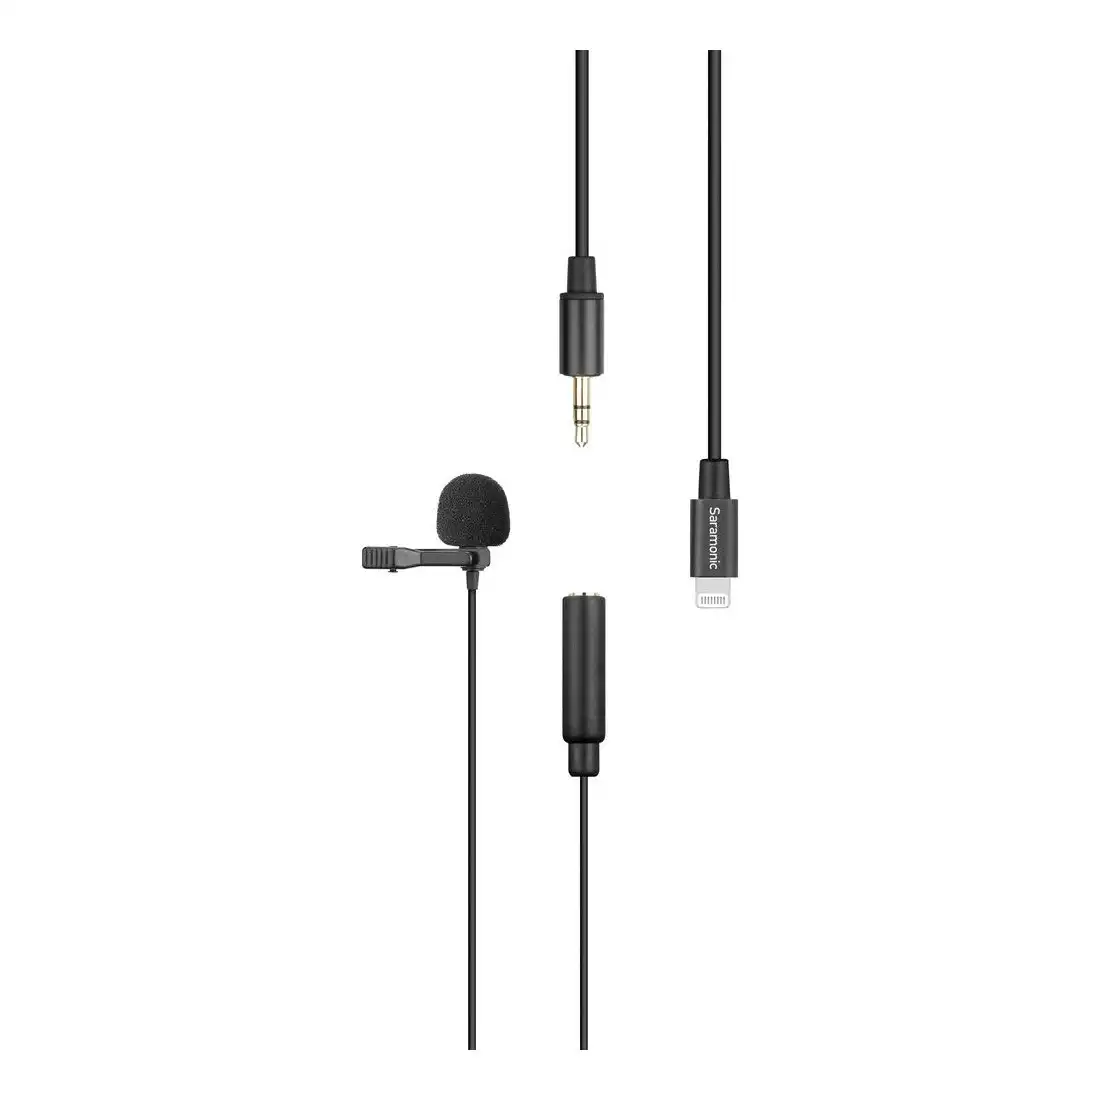 Saramonic LavMicro U1B Omnidirectional Lavalier Microphone with Lightning Connector for iOS Devices (6m)